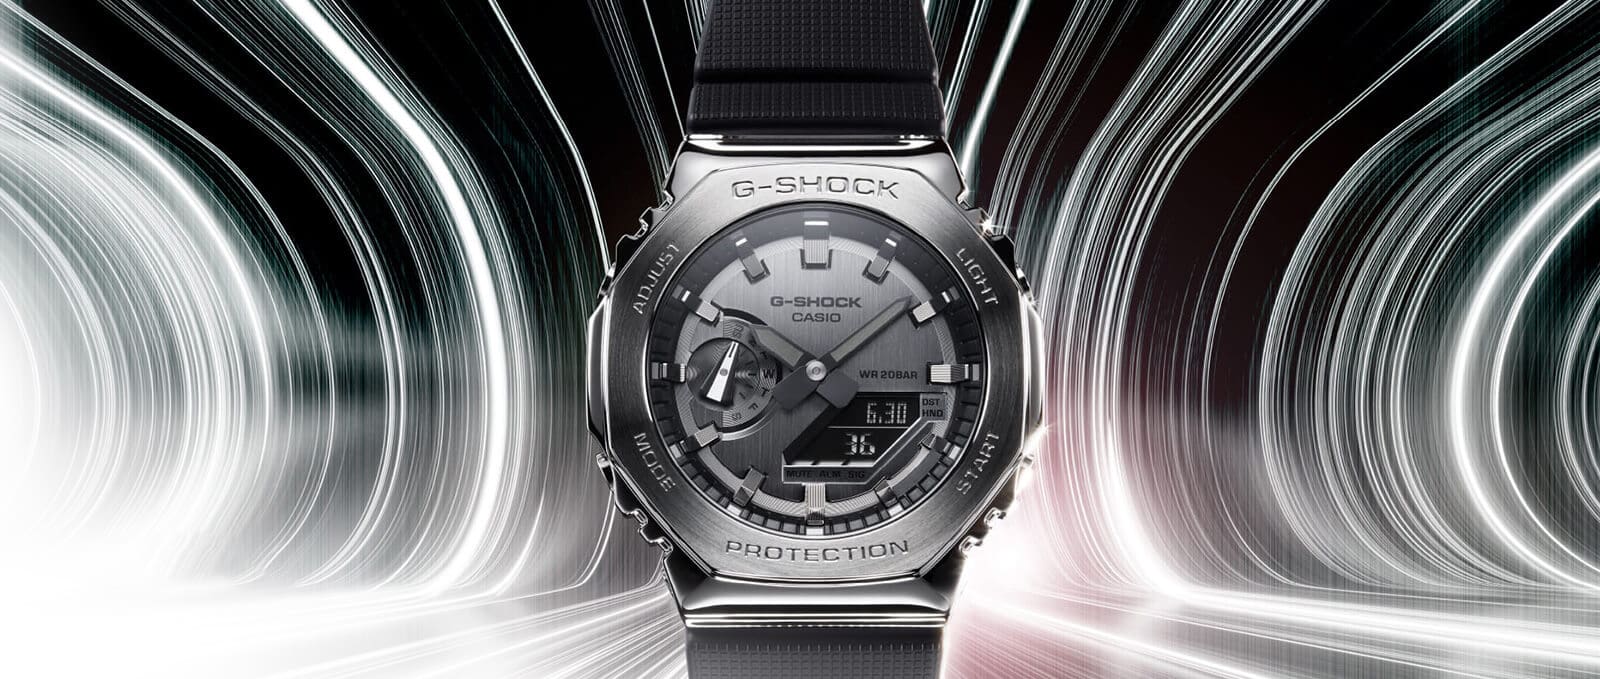 GM2100 watch with silver face and black band